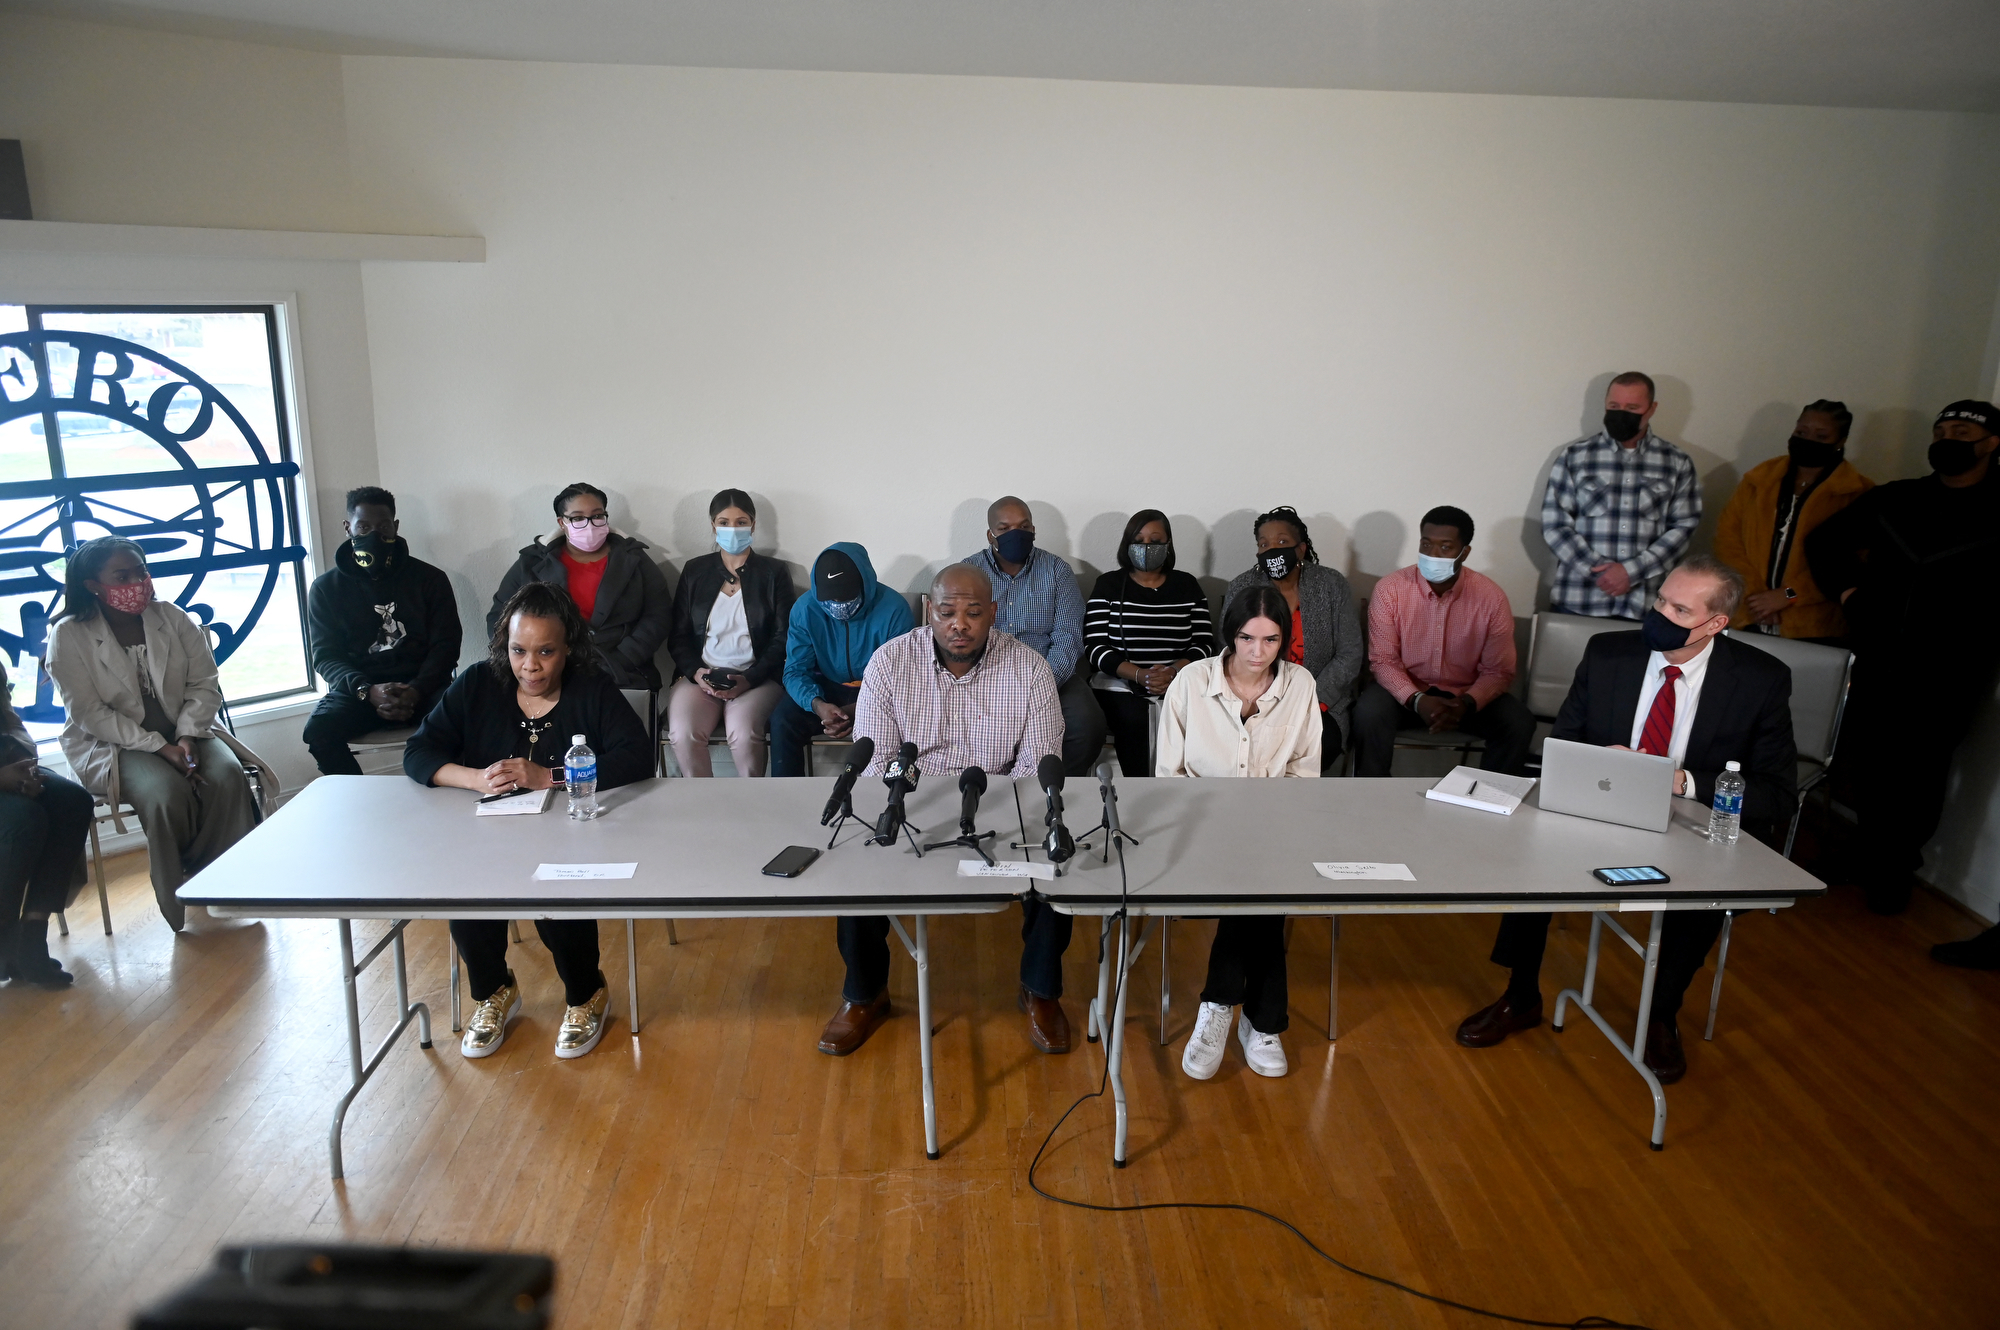 Family and friends of Kevin Peterson, Jr. assemble at the Aero Club Banquet Room in Vancouver for a press conference on Thursday morning, March 18, 2021.